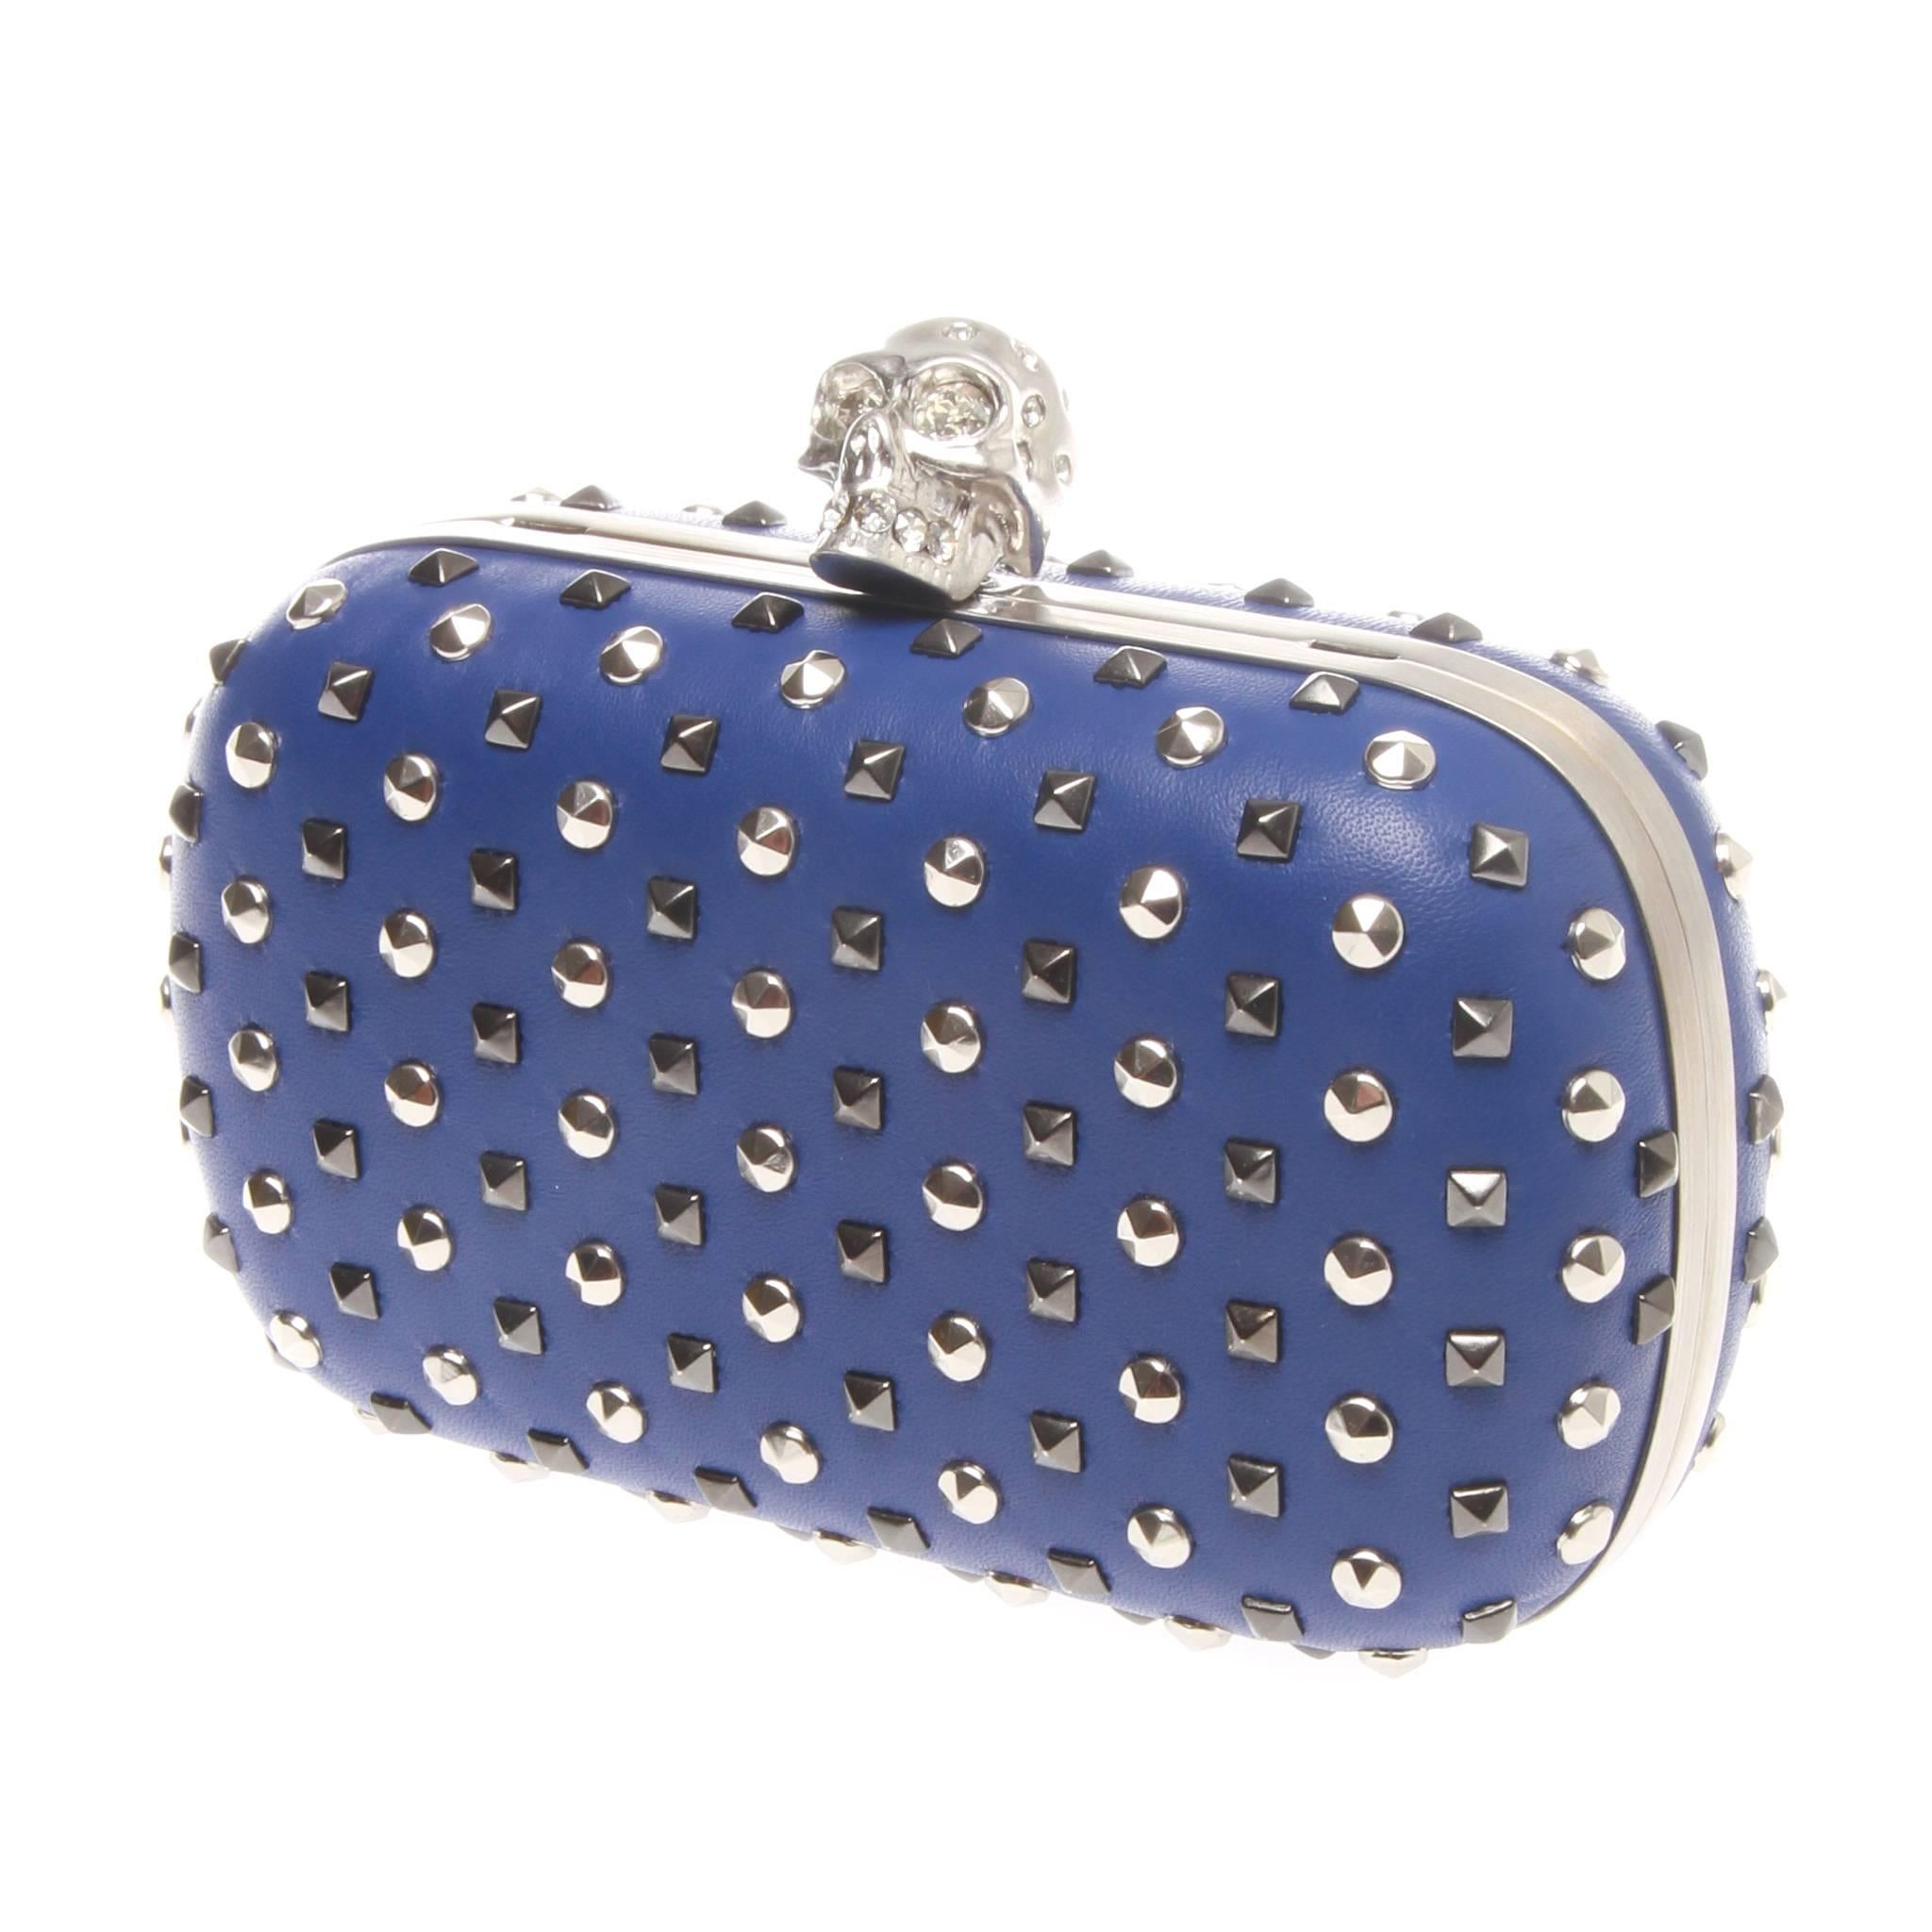 Alexander McQueen Studded Crystal-Skull blue Clutch Bag
Silver metal hardware frames hard-shell design.
Signature studded skull clasp inlaid with crystals.
Removable chain shoulder strap, 23